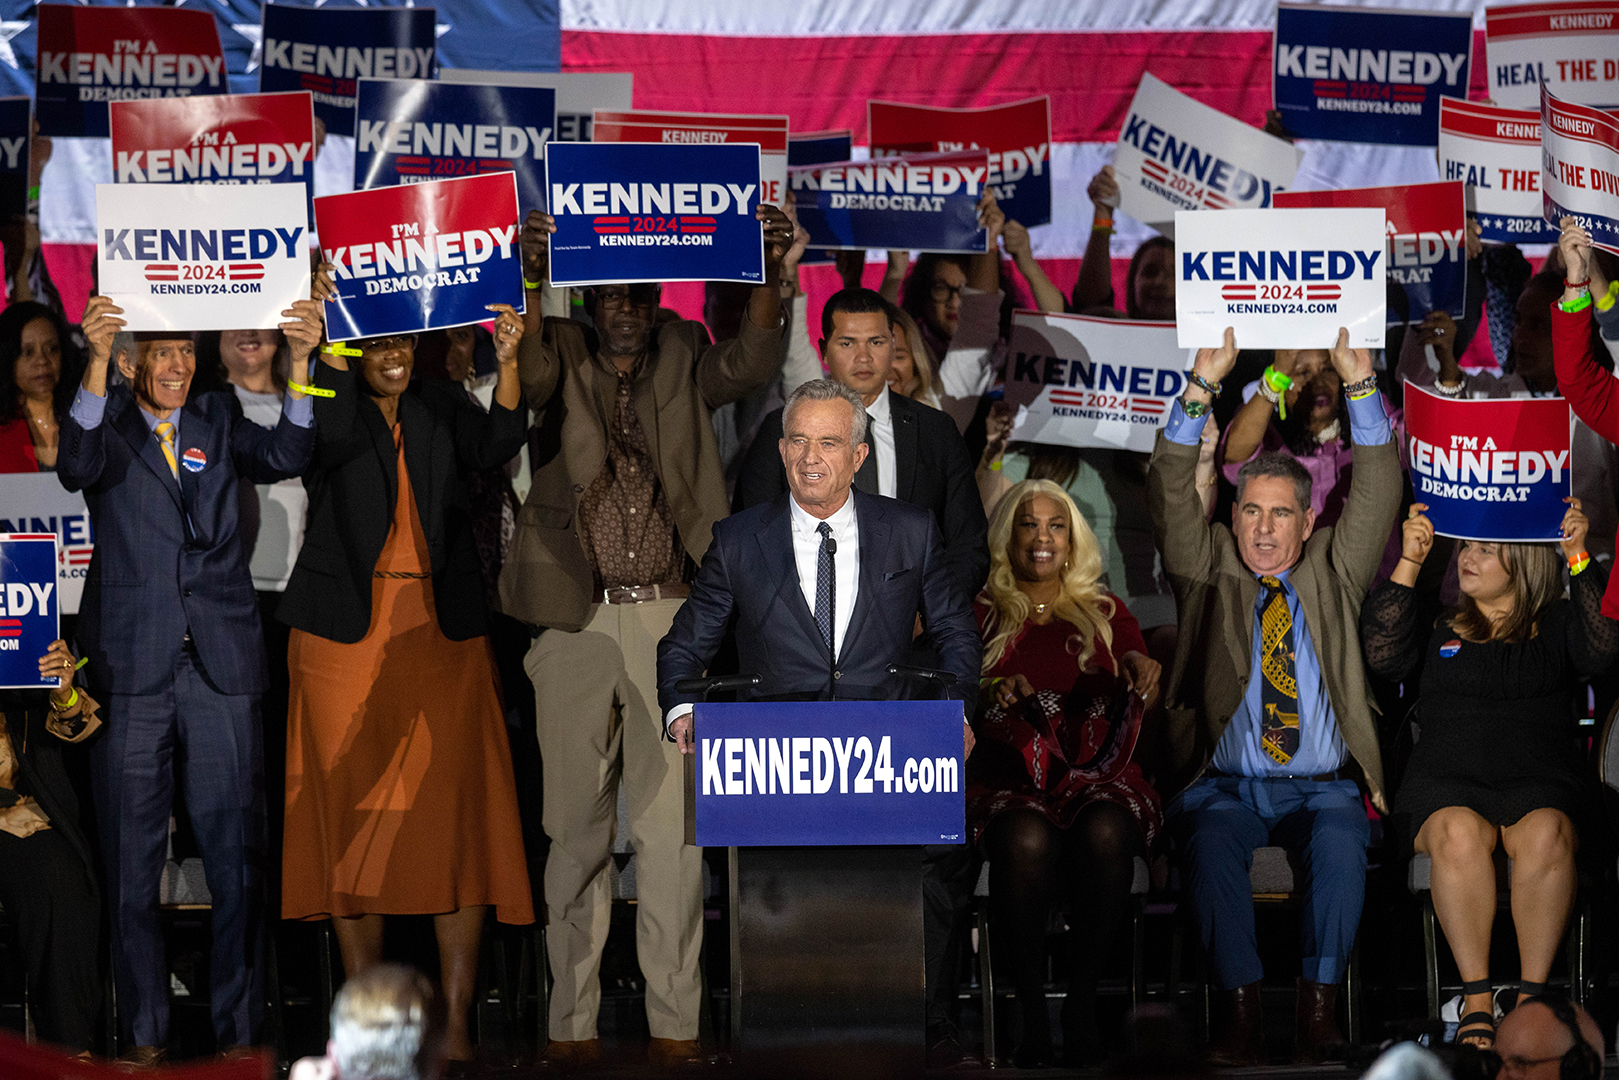 Robert F. Kennedy Jr. officially announces his candidacy for President on April 19 in Boston.